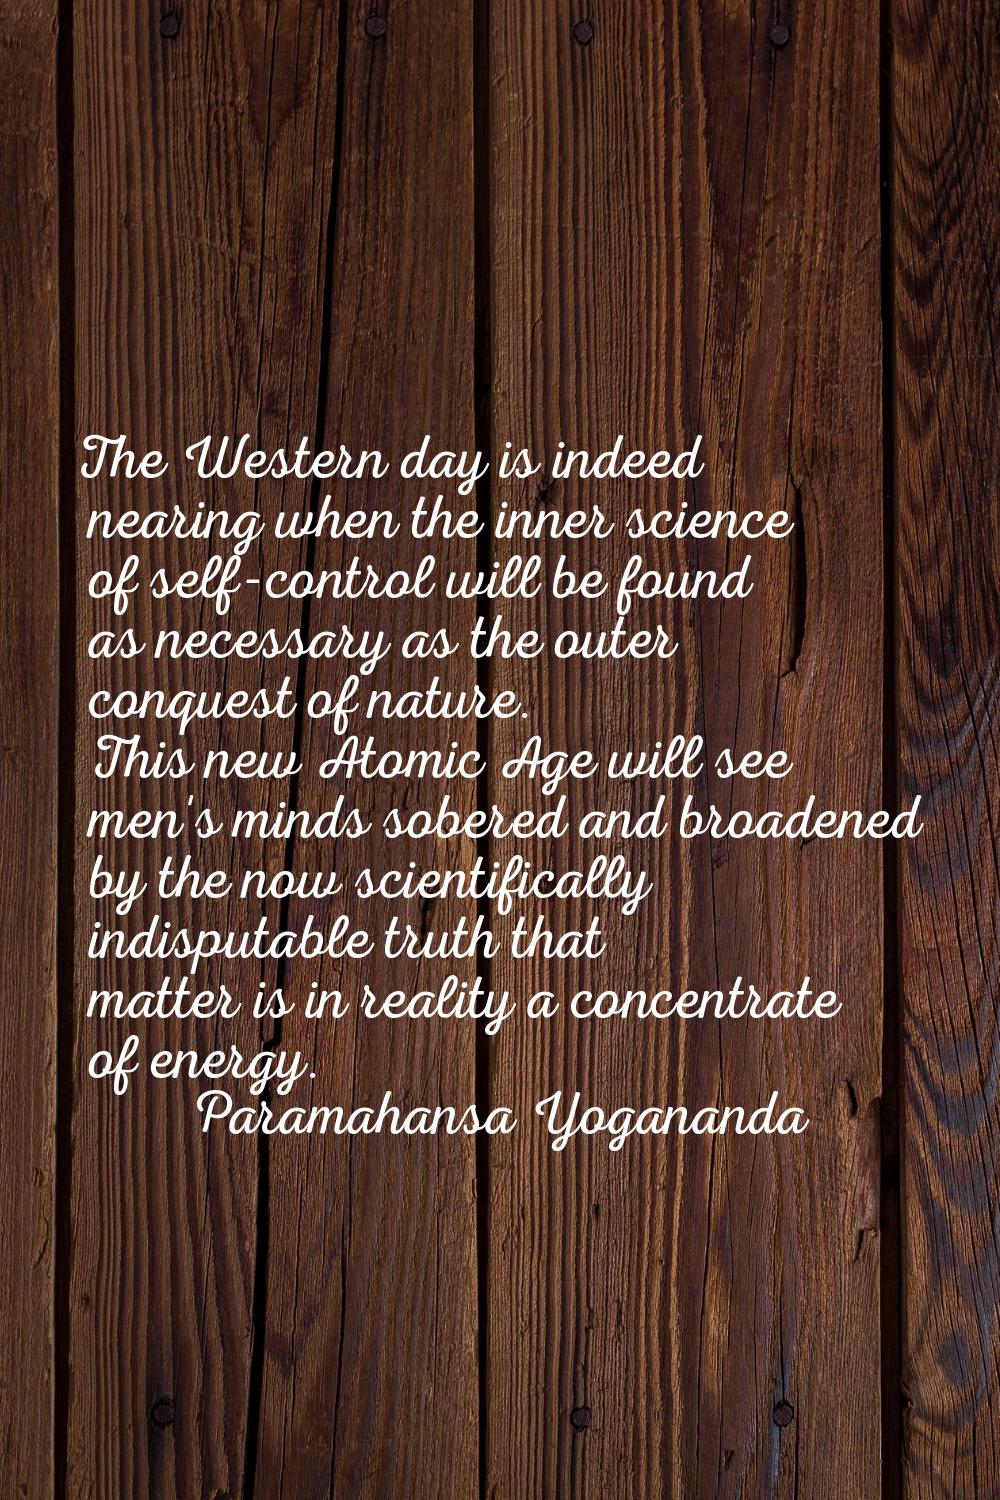 The Western day is indeed nearing when the inner science of self-control will be found as necessary